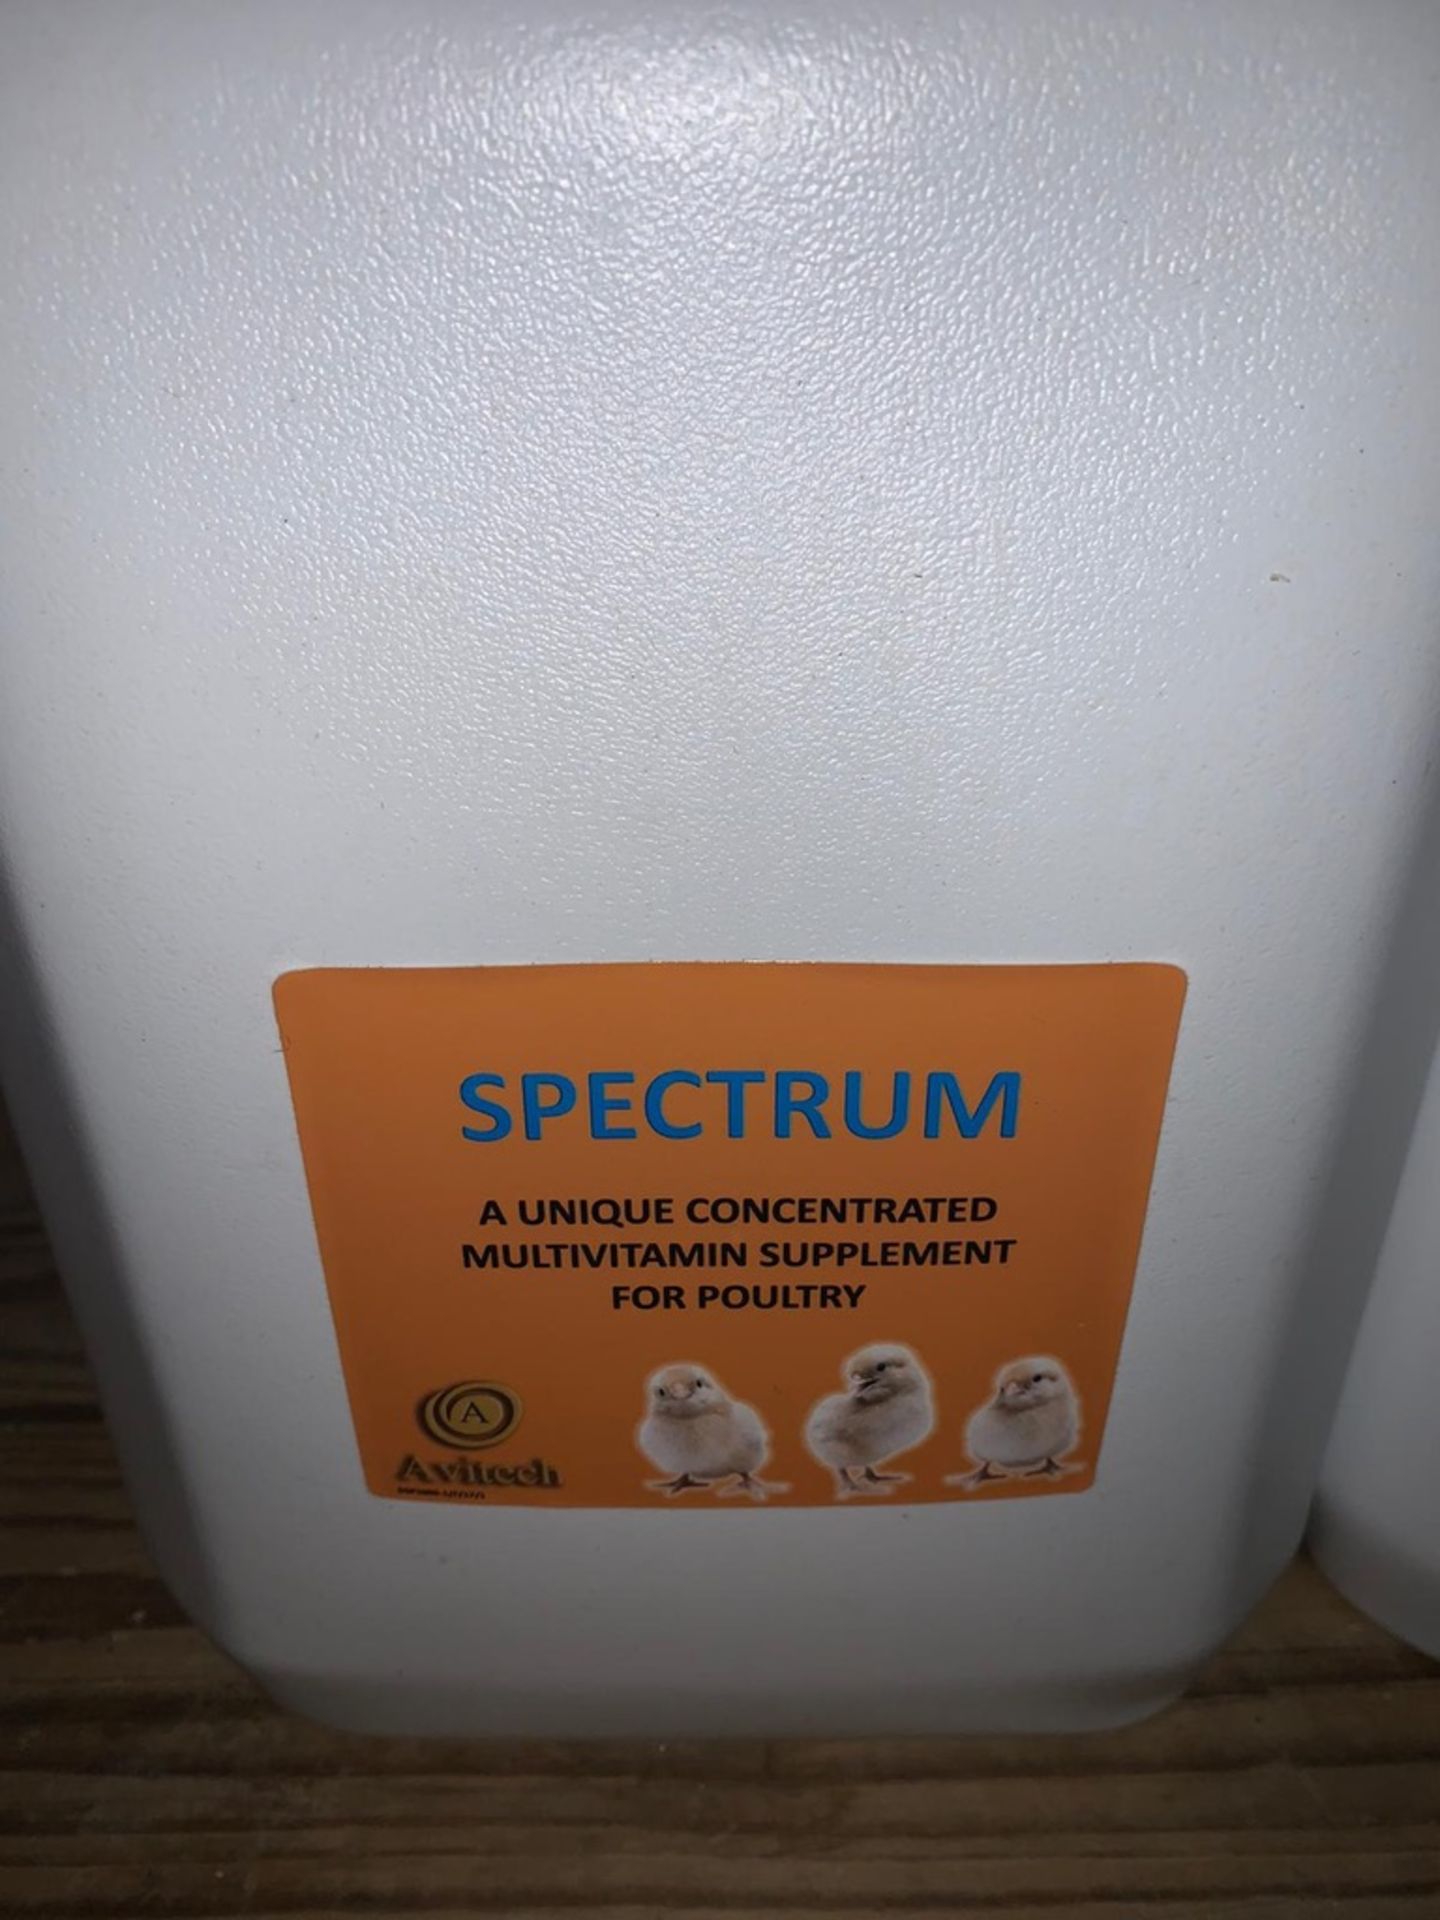 4 x 5 Litres Spectrum Multivitamin for Poultry - Image 2 of 3